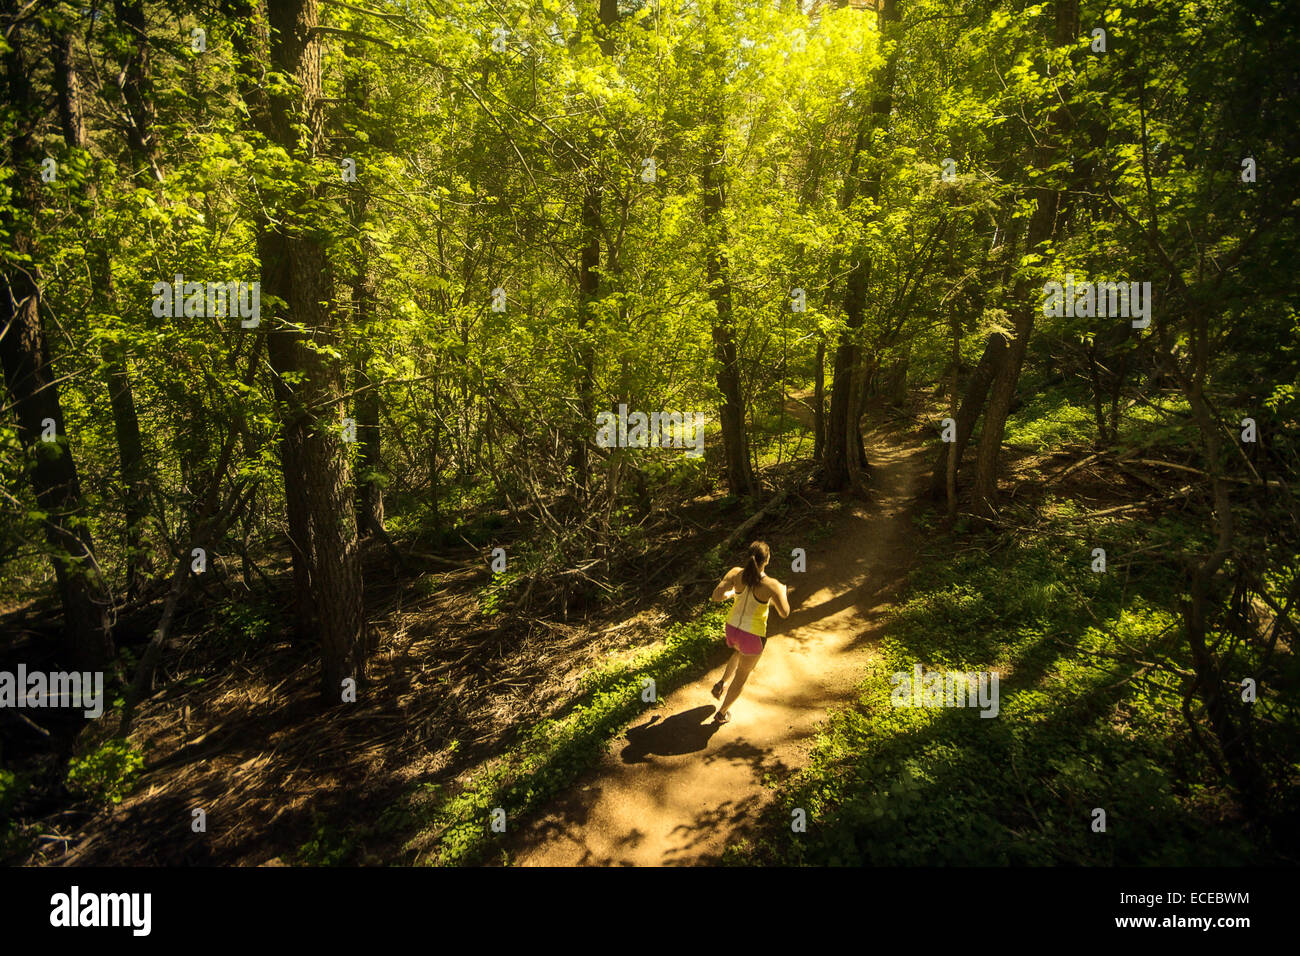 USA, Colorado, Golden, femme trail running through forest Banque D'Images